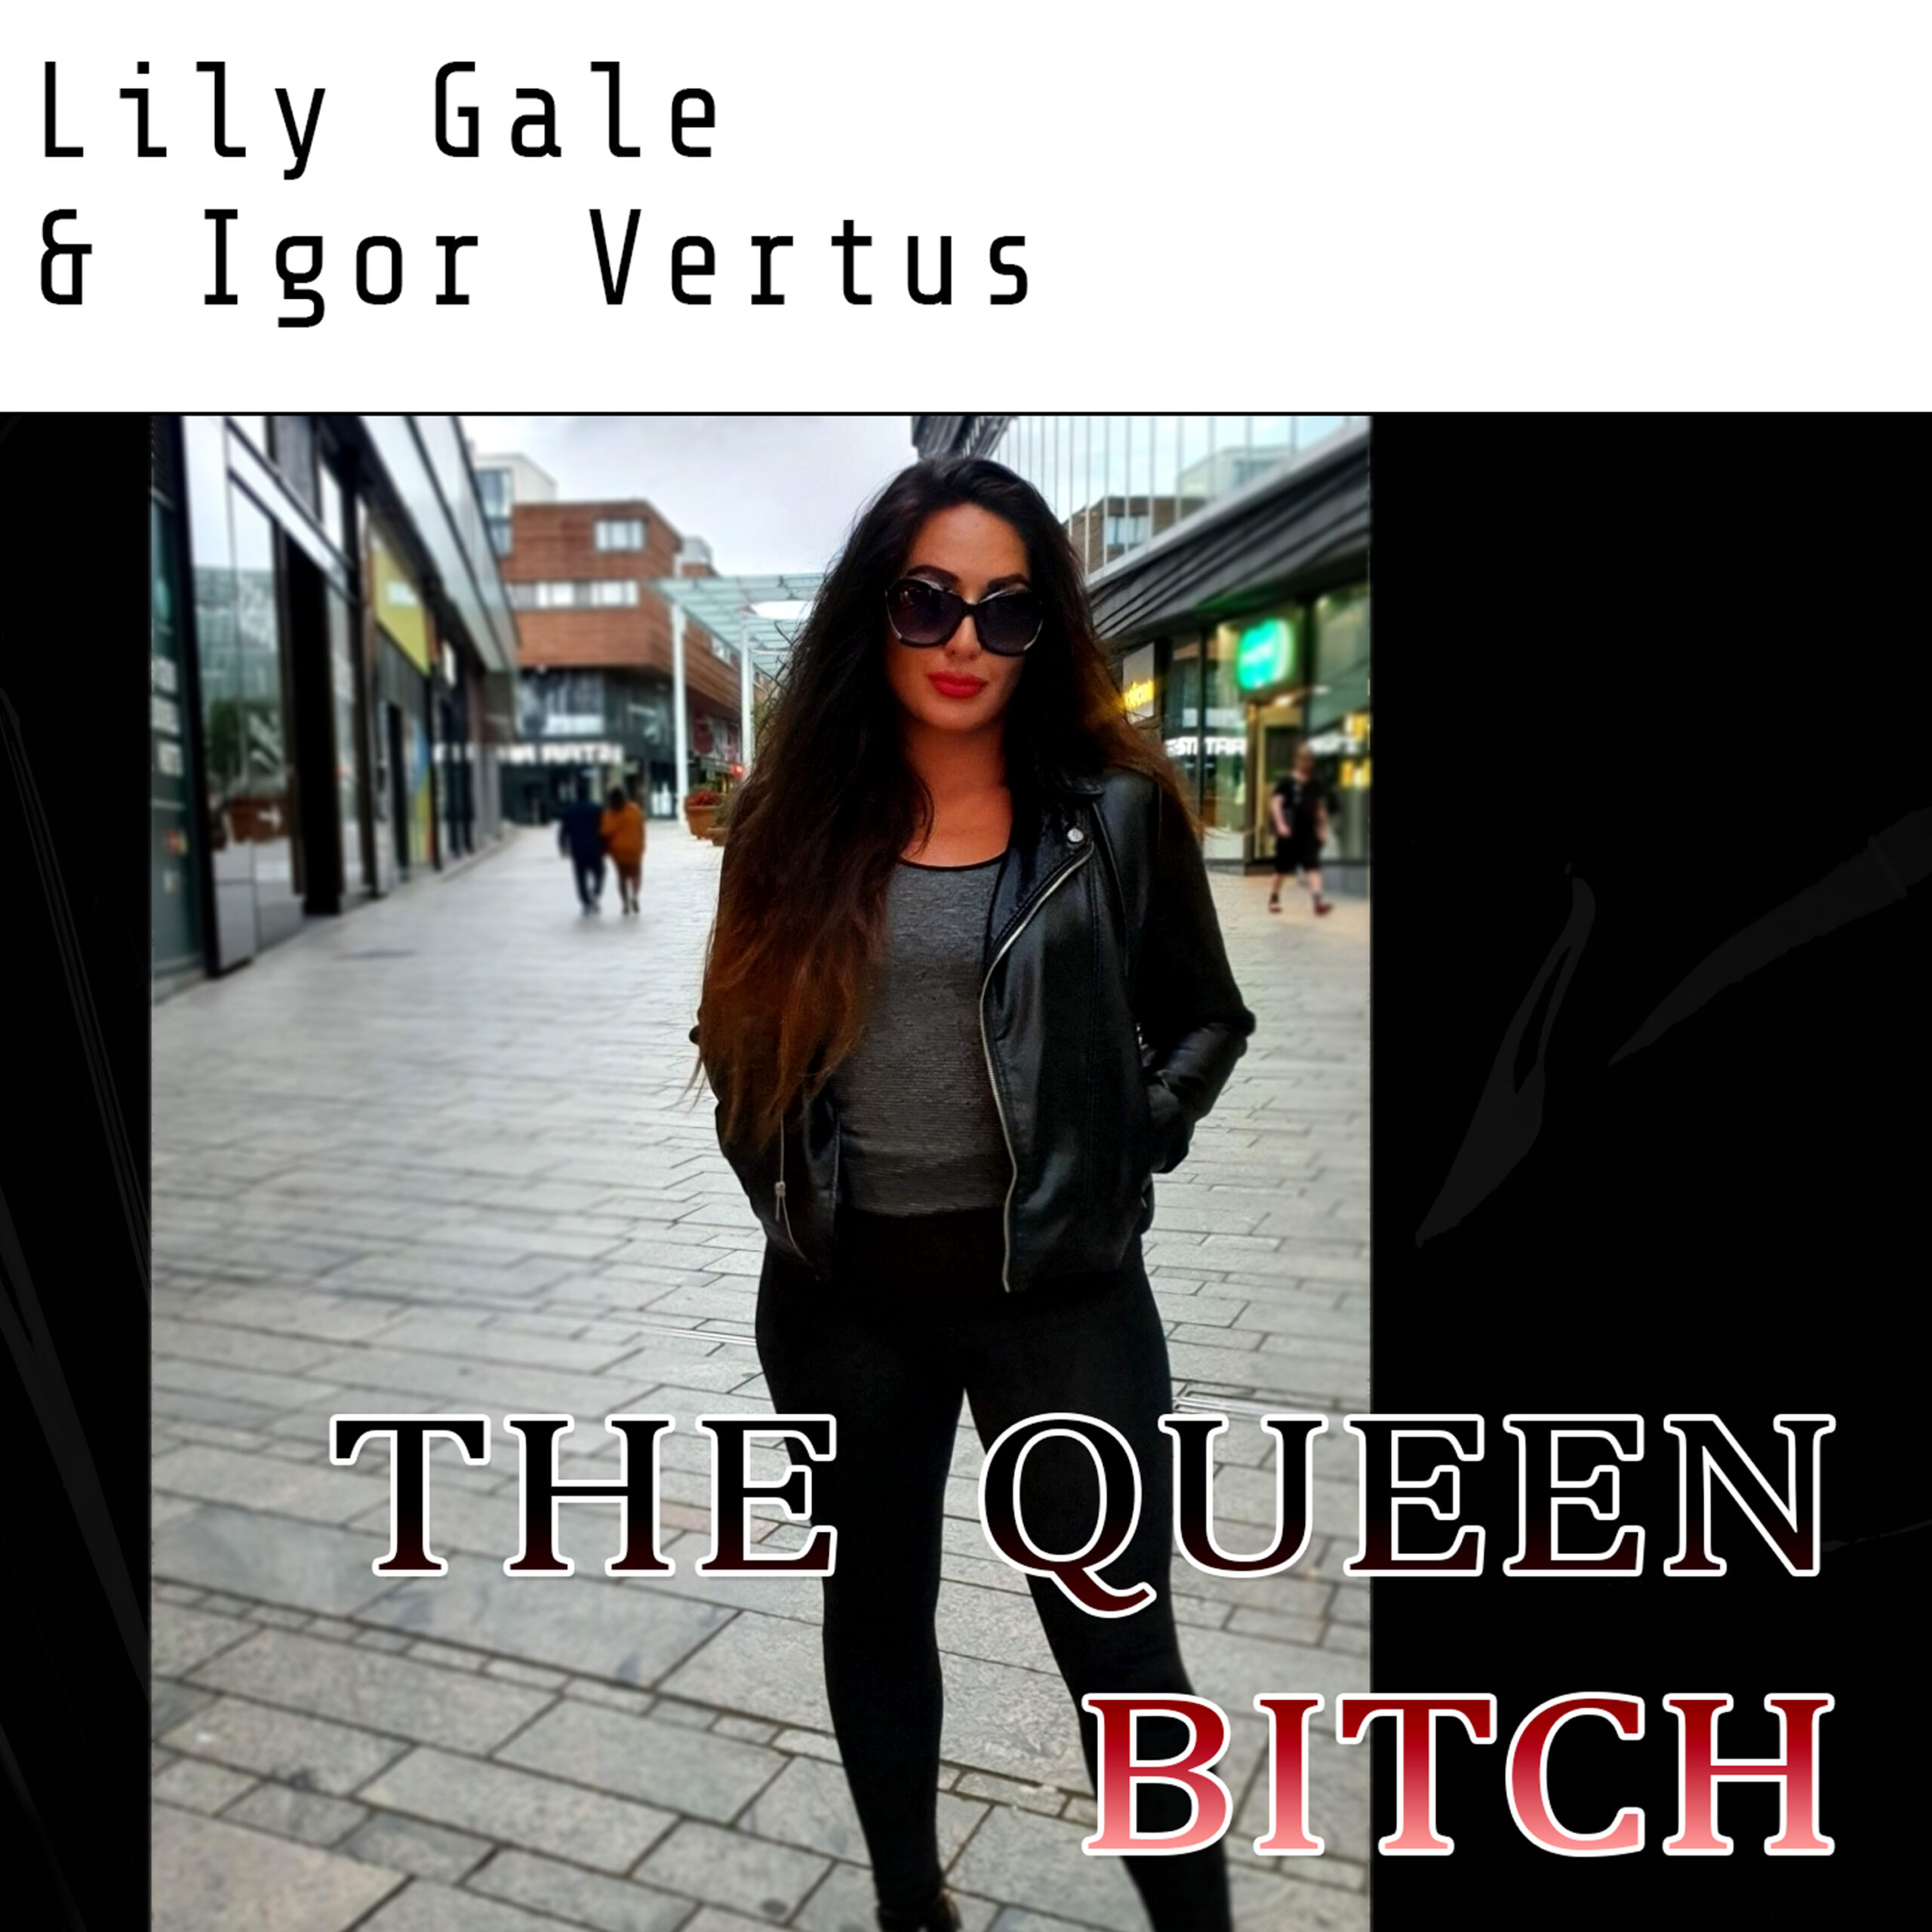 Lily-Gale-Igor-Vertus-The-Queen-Bitch